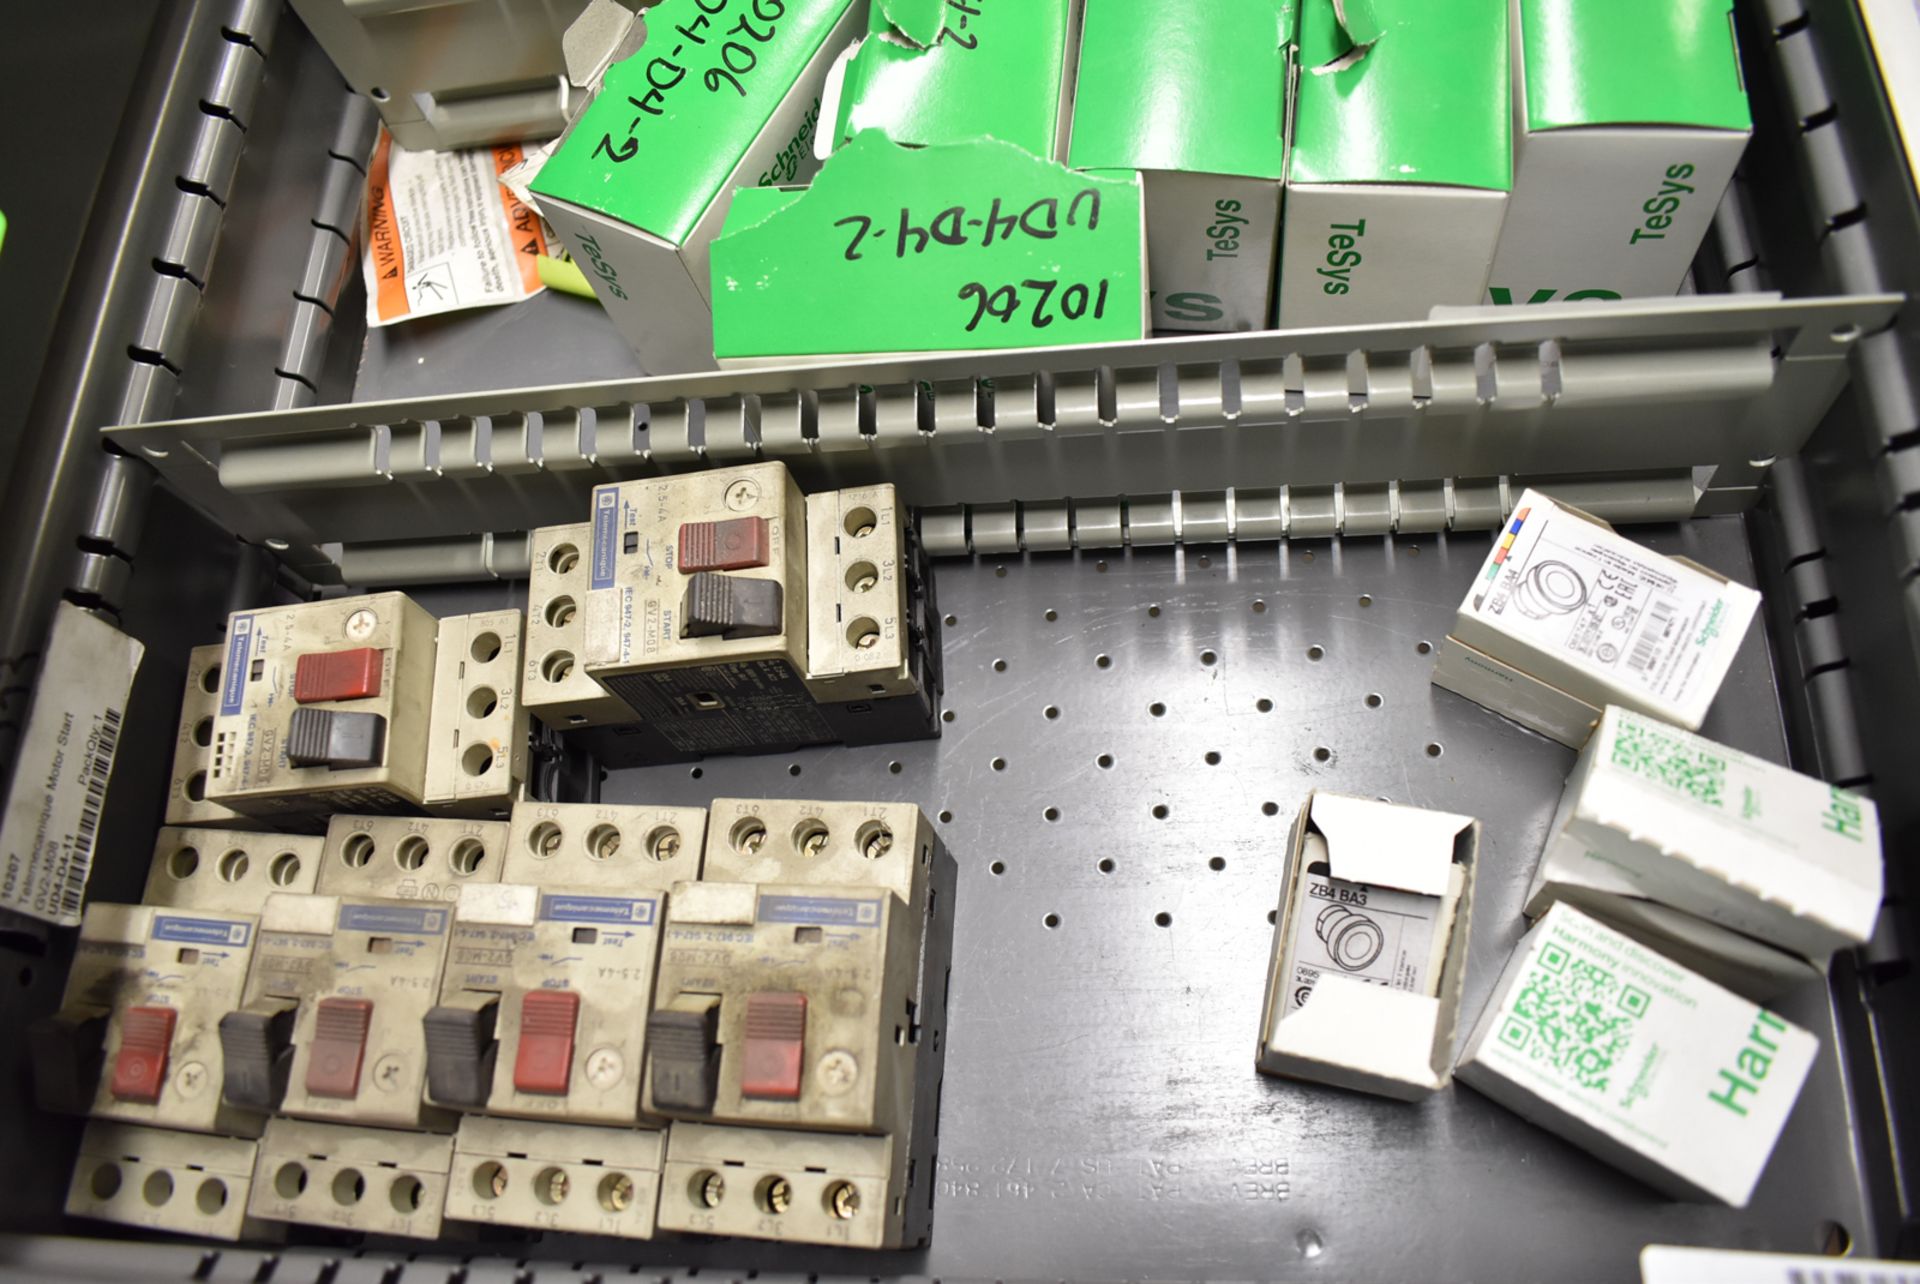 LOT/ CONTENTS OF DRAWER INCLUDING TESYS COMPONENTS - RELAYS, MOTOR STARTS, CONTROL RELAYS, FUSE - Image 2 of 4